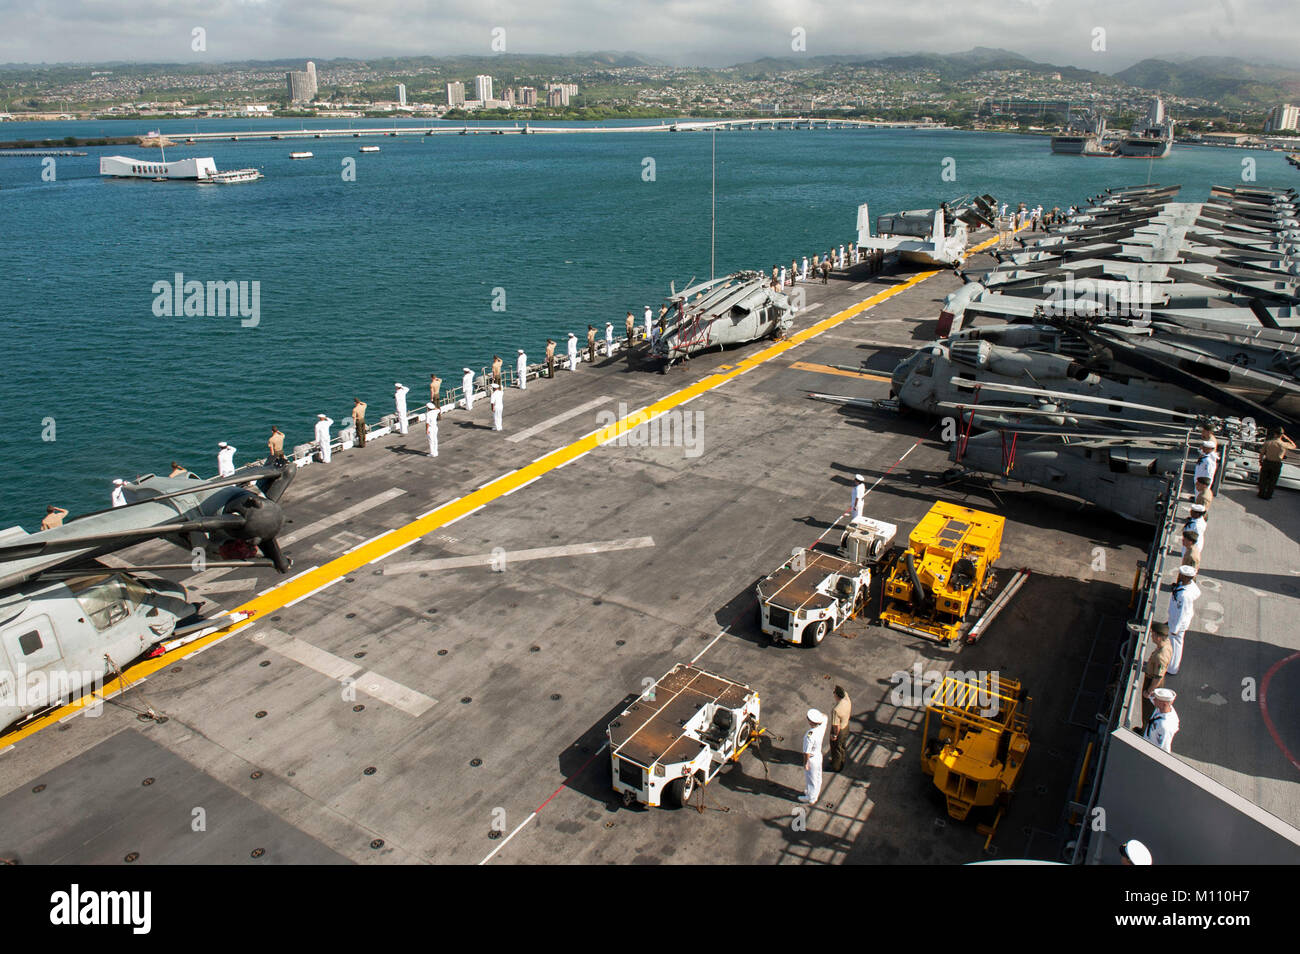 180123-N-ZS023-029  PEARL HARBOR (Jan. 23, 2018) Sailors and Marines aboard the amphibious assault ship USS America (LHA 6) render honors to the USS Arizona memorial as the ship arrives in Pearl Harbor, Hawaii, for a scheduled port visit. America, part of the America Amphibious Ready Group, with the embarked 15th Marine Expeditionary Unit (15th MEU), is returning from a 7-month deployment to the U.S. 3rd, 5th and 7th fleet areas of operations. (U.S. Navy photo by Mass Communication Specialist 3rd Class Vance Hand/Released) Stock Photo